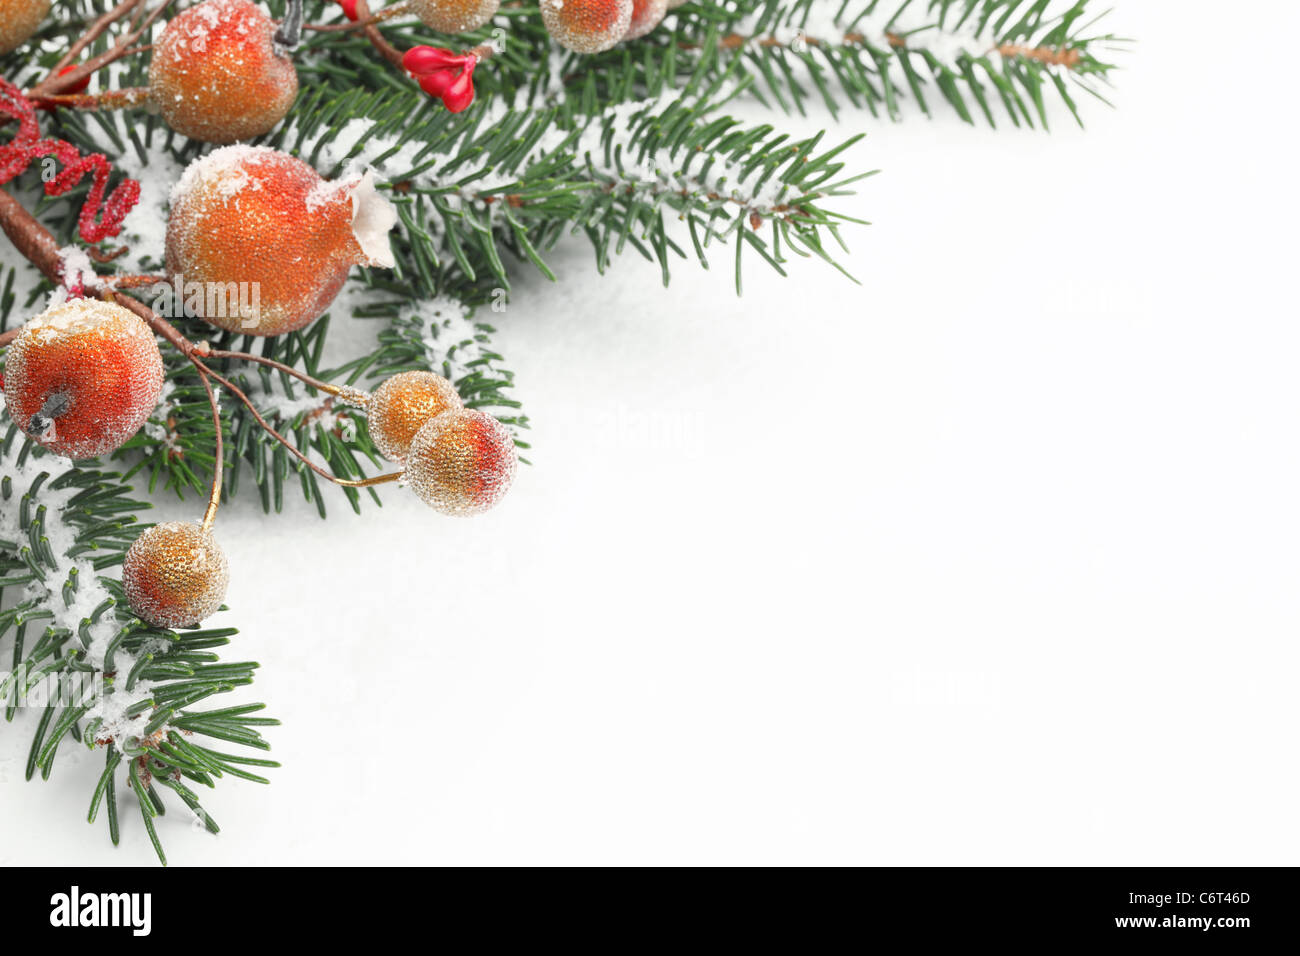 Pine branches and berries with snow for Christmas border. Stock Photo